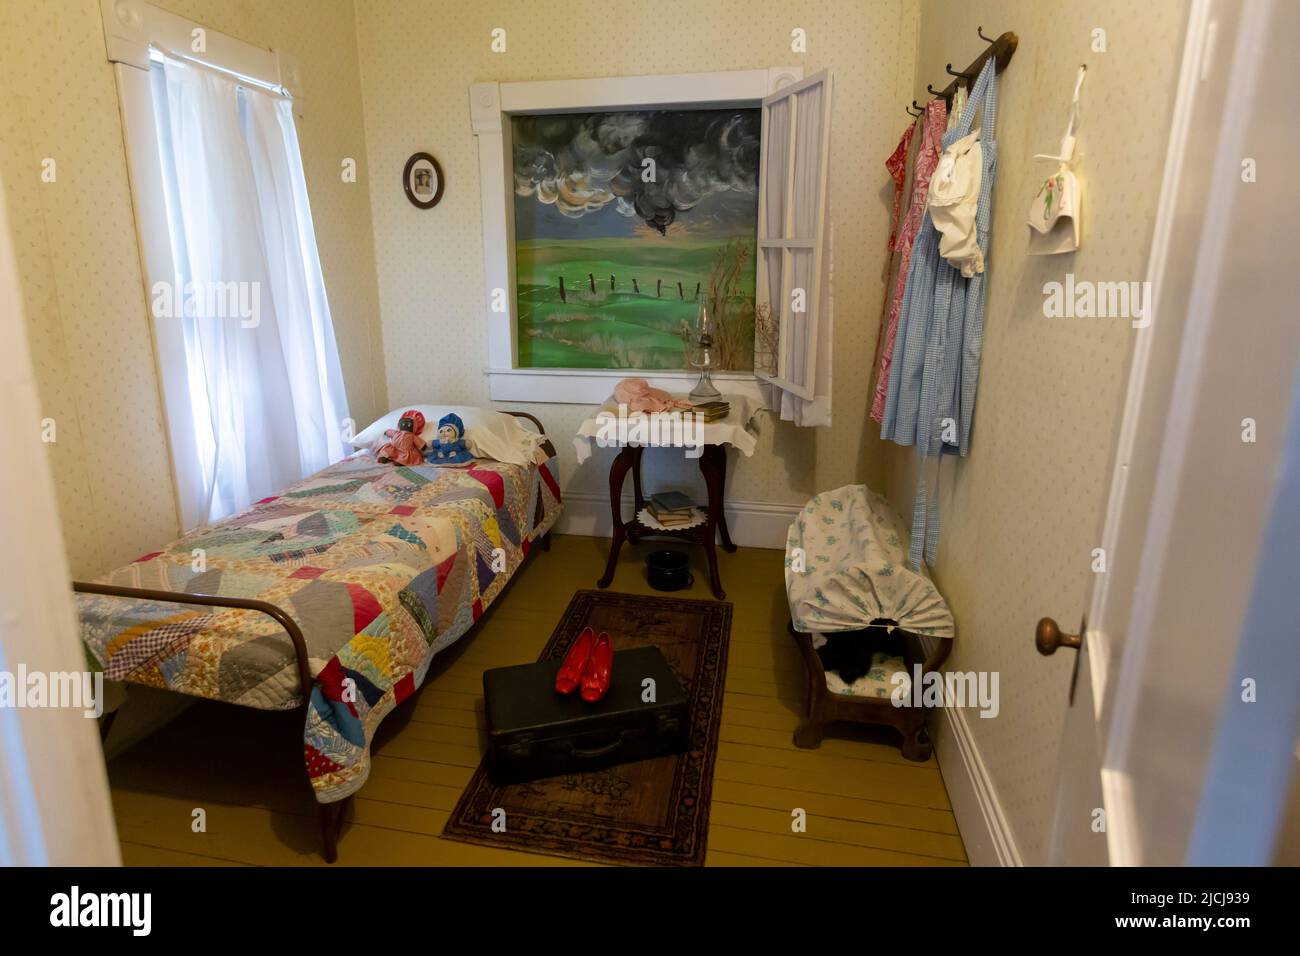 Liberal, Kansas - Dorothy's House and the Land of Oz, a tourist attraction modeled after the 1939 movie, The Wizard of Oz. Dorothy's bedroom is in a m Stock Photo